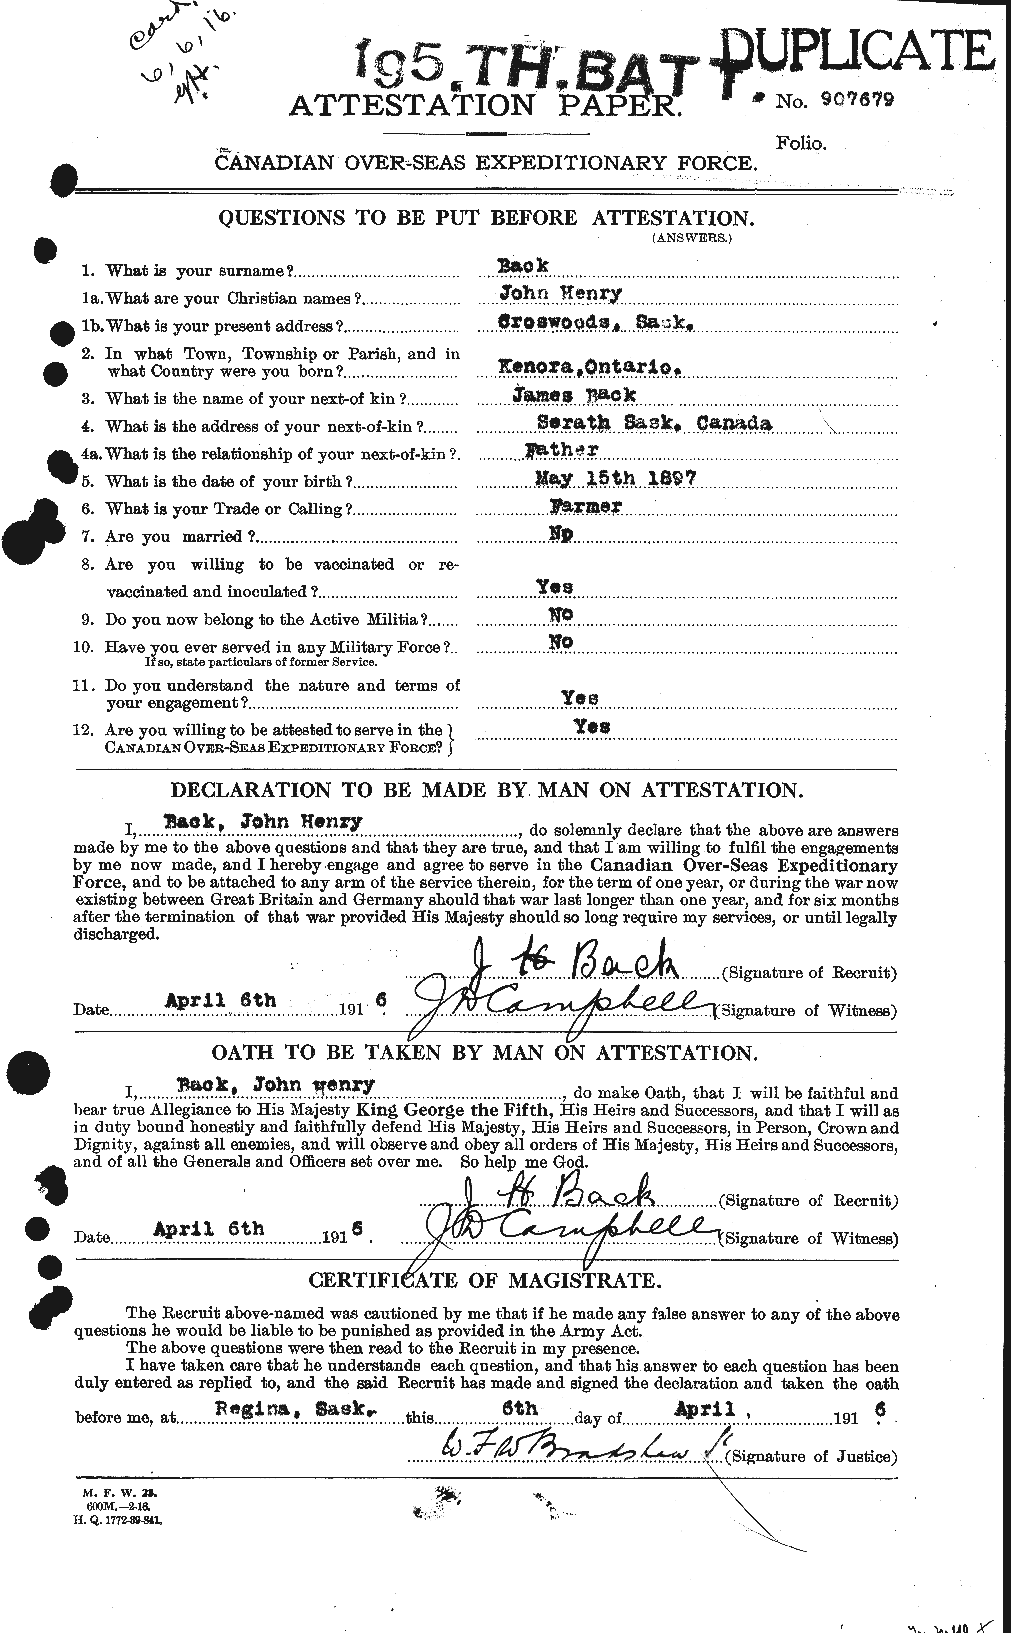 Personnel Records of the First World War - CEF 218003a